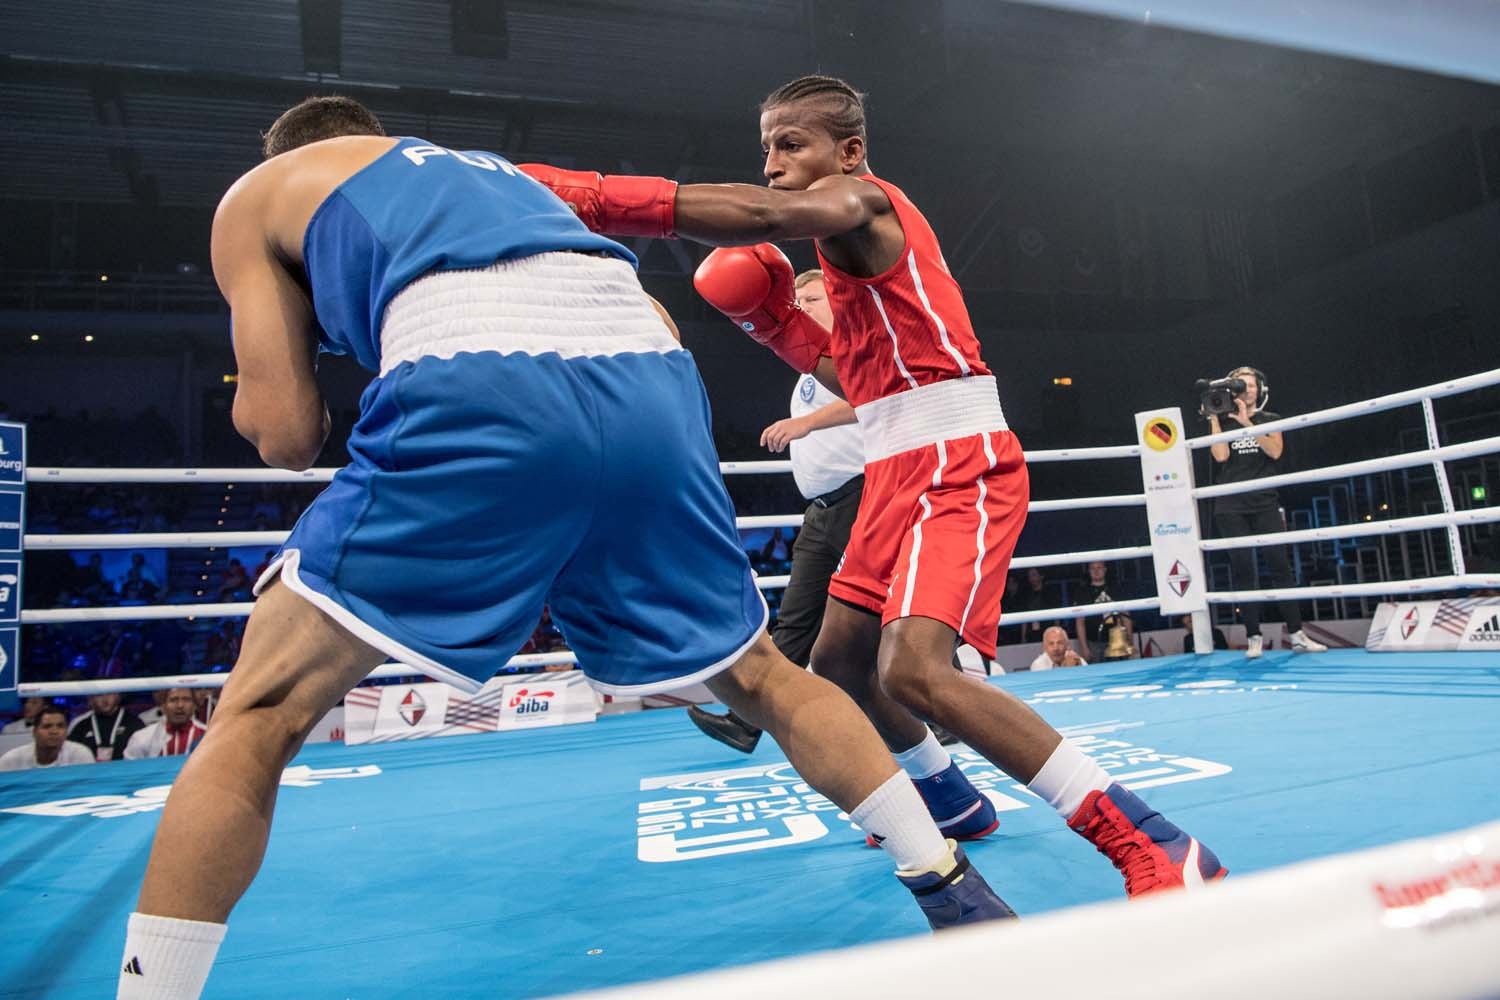 Cuba's Joahnys Argilagos begun the defence of his light flyweight title with a split-decision win over Puerto Rico's Oscar Collazo at the 2017 AIBA World Championships ©AIBA